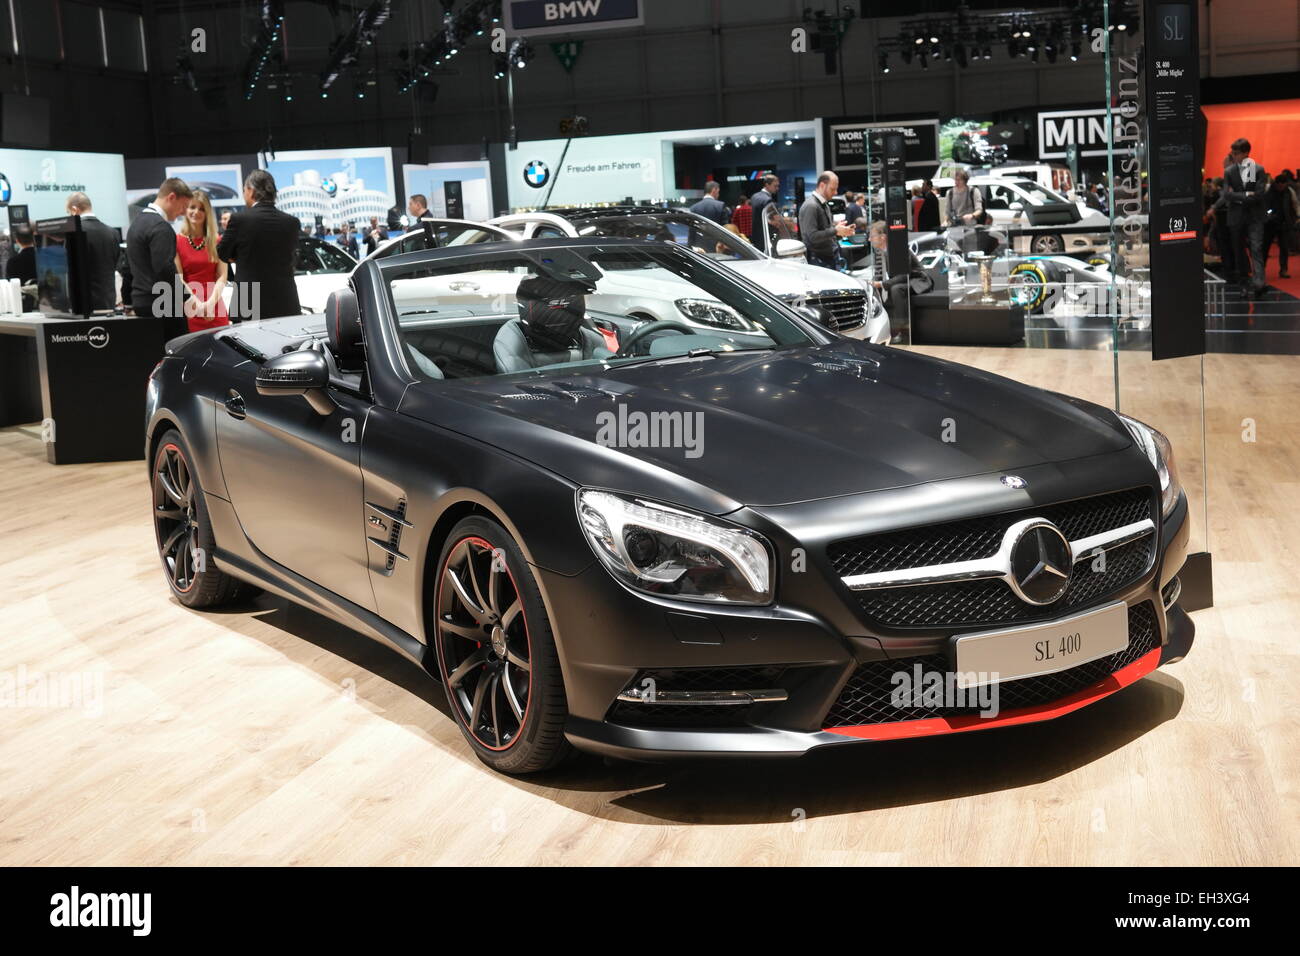 Mercedes Sl 400 High Resolution Stock Photography and Images - Alamy